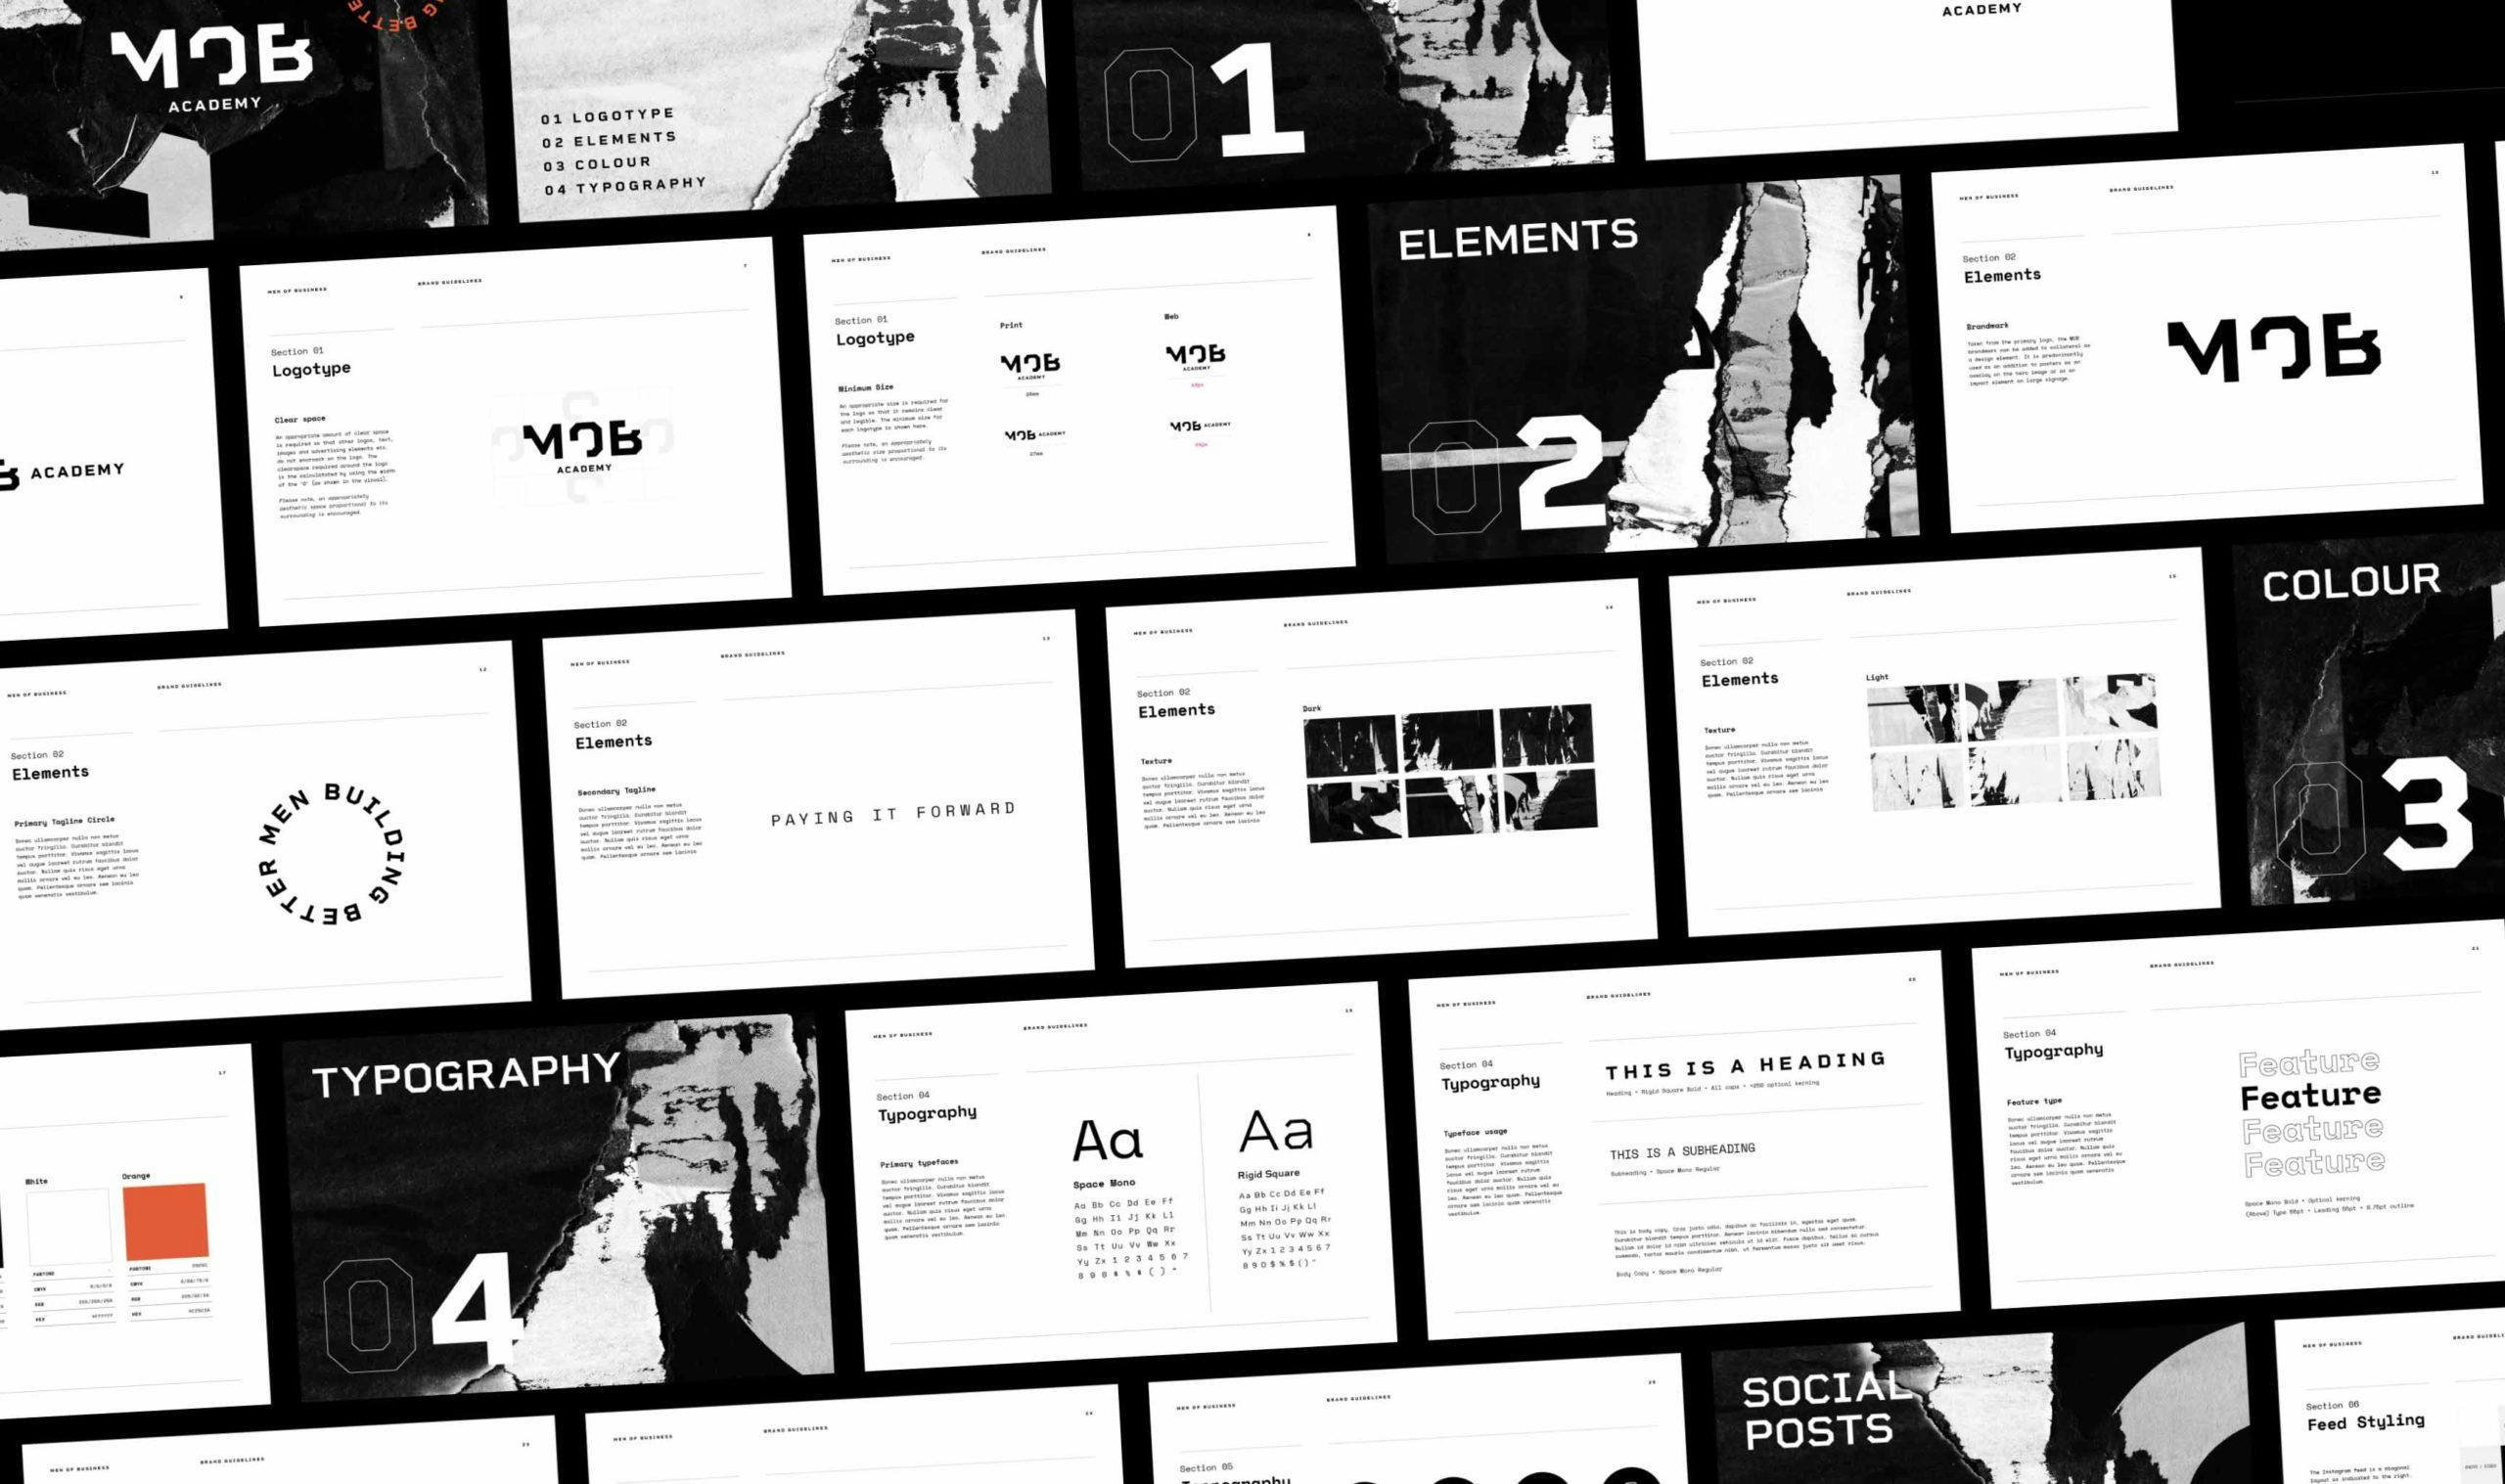 A collage of different Men of Business Academy brand elements